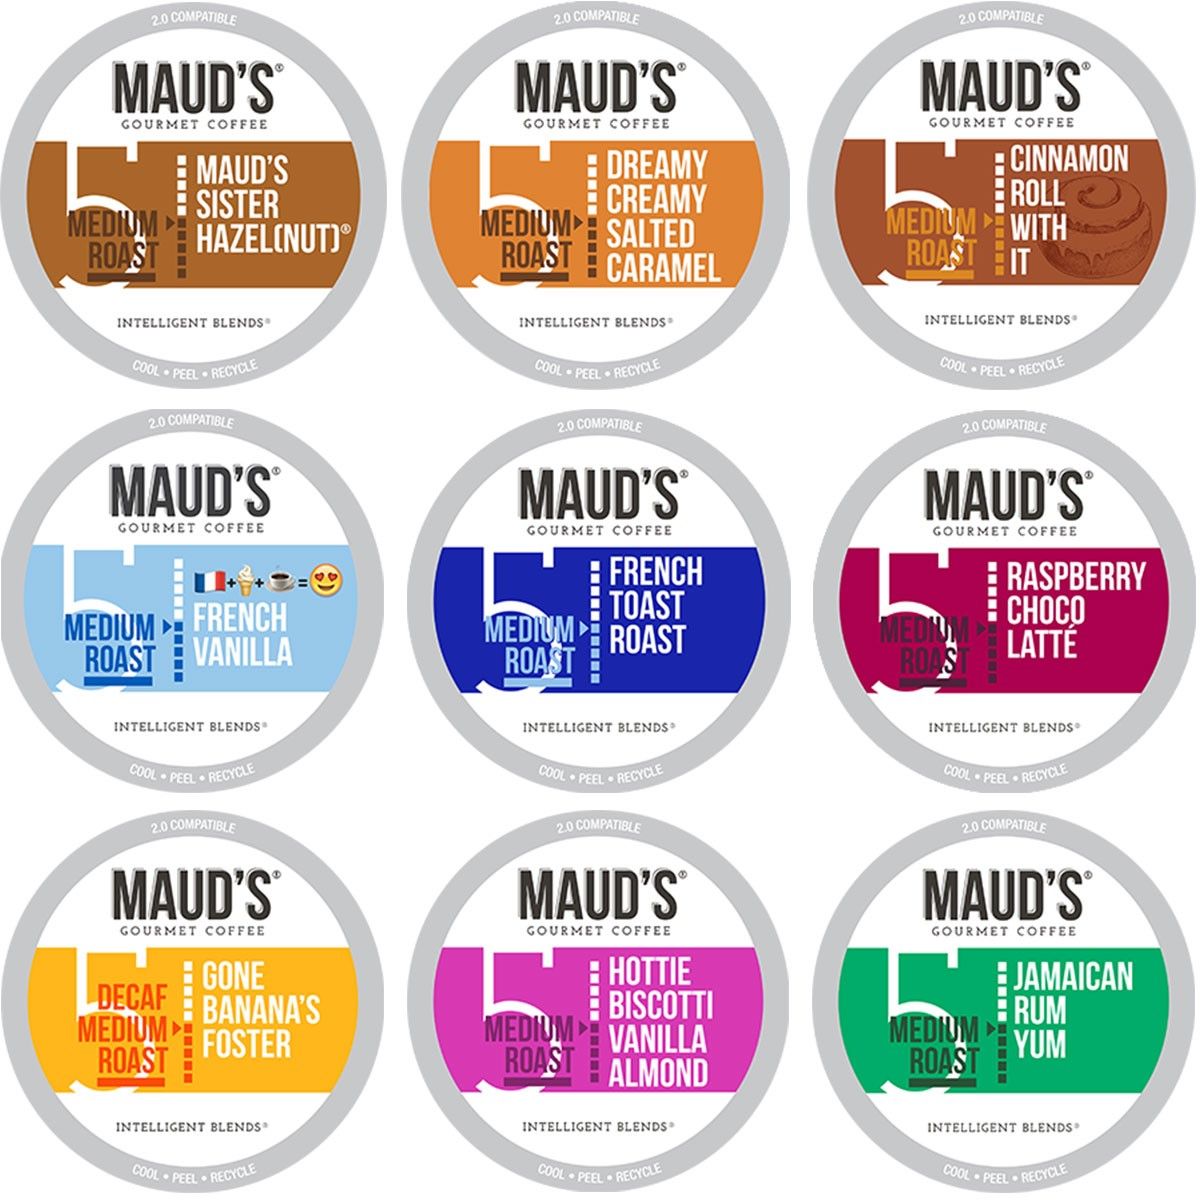 Maud's Flavored Coffee Variety Pack (9 Blends) - 40 Pods